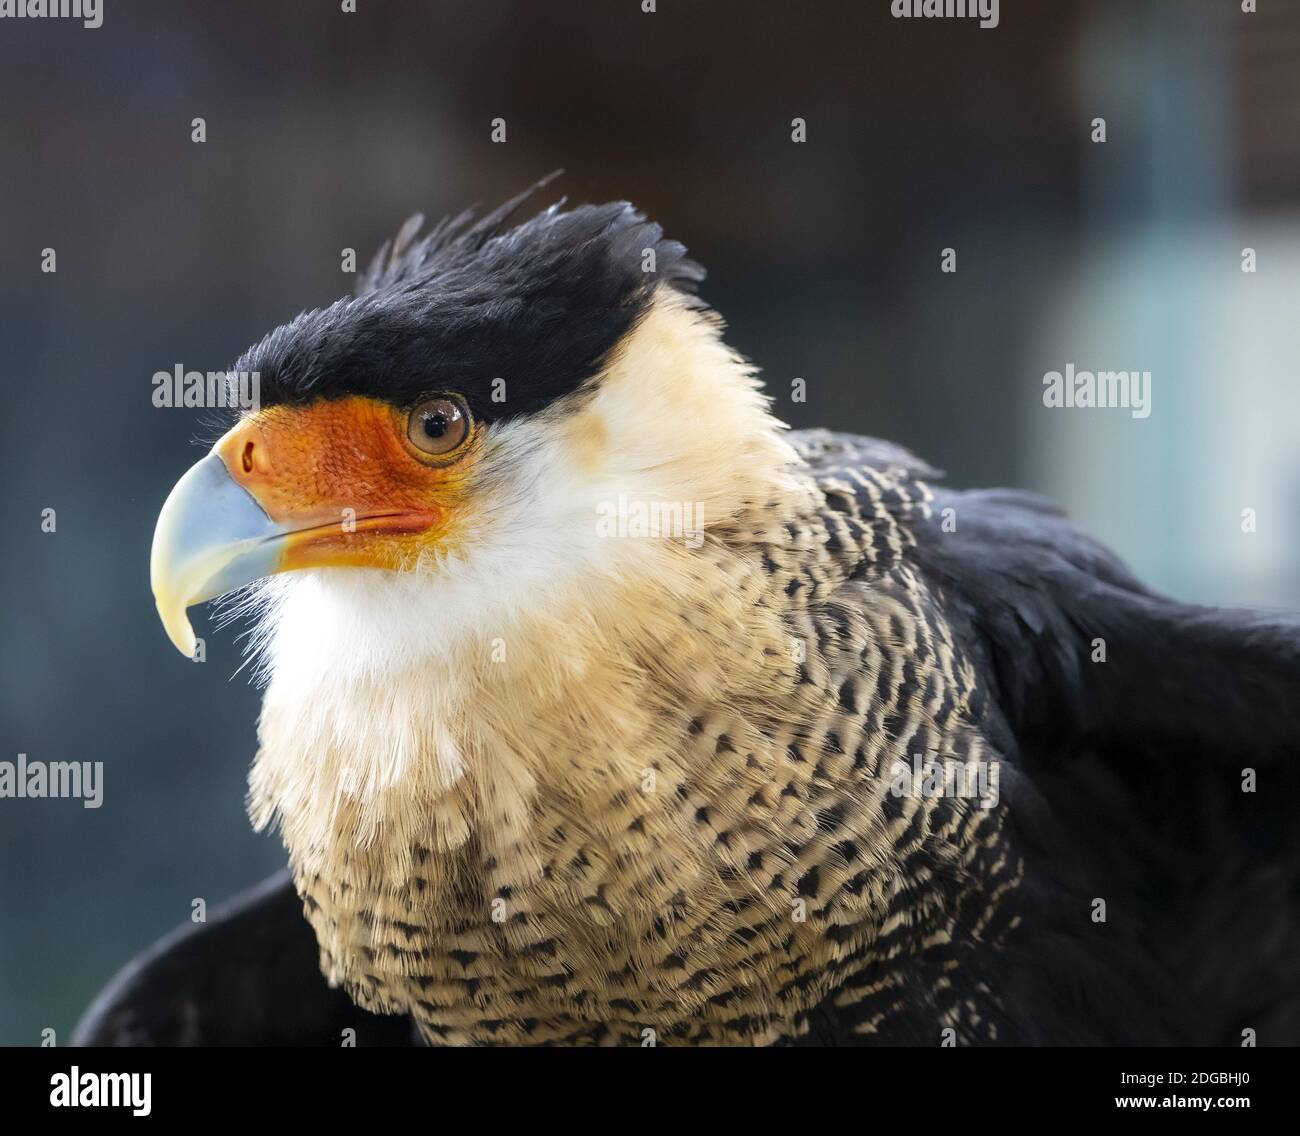 A Caracara Bird Sits In The Afternoon Sun Outdoors Stock Photo